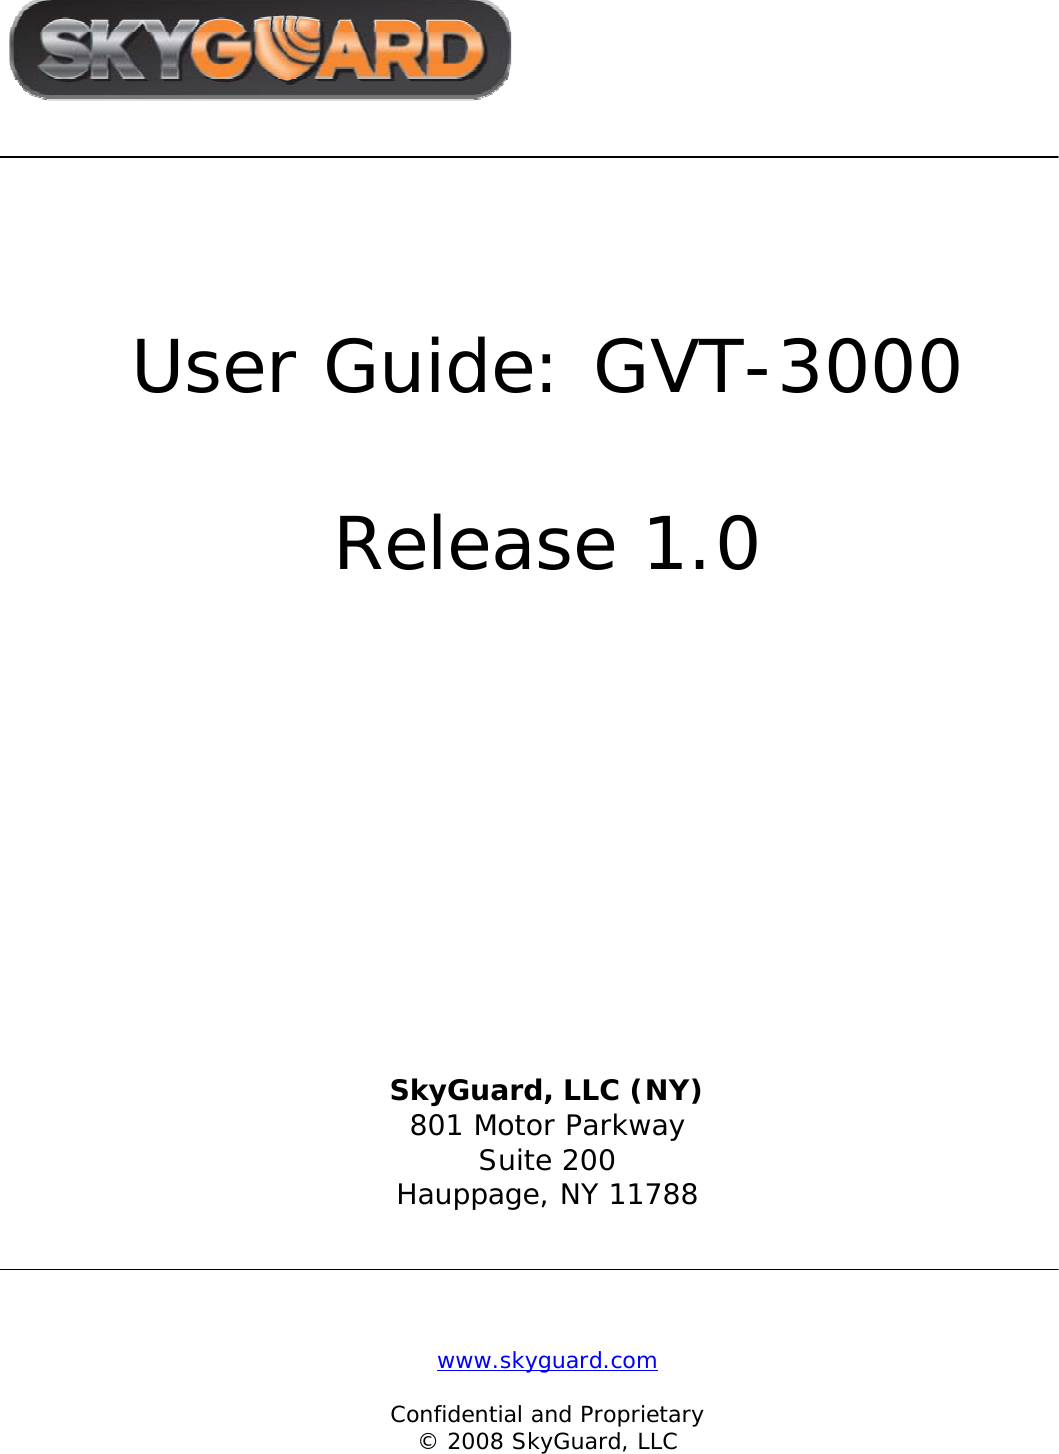                                      www.skyguard.com  Confidential and Proprietary © 2008 SkyGuard, LLC             User Guide: GVT-3000   Release 1.0                   SkyGuard, LLC (NY) 801 Motor Parkway Suite 200 Hauppage, NY 11788 